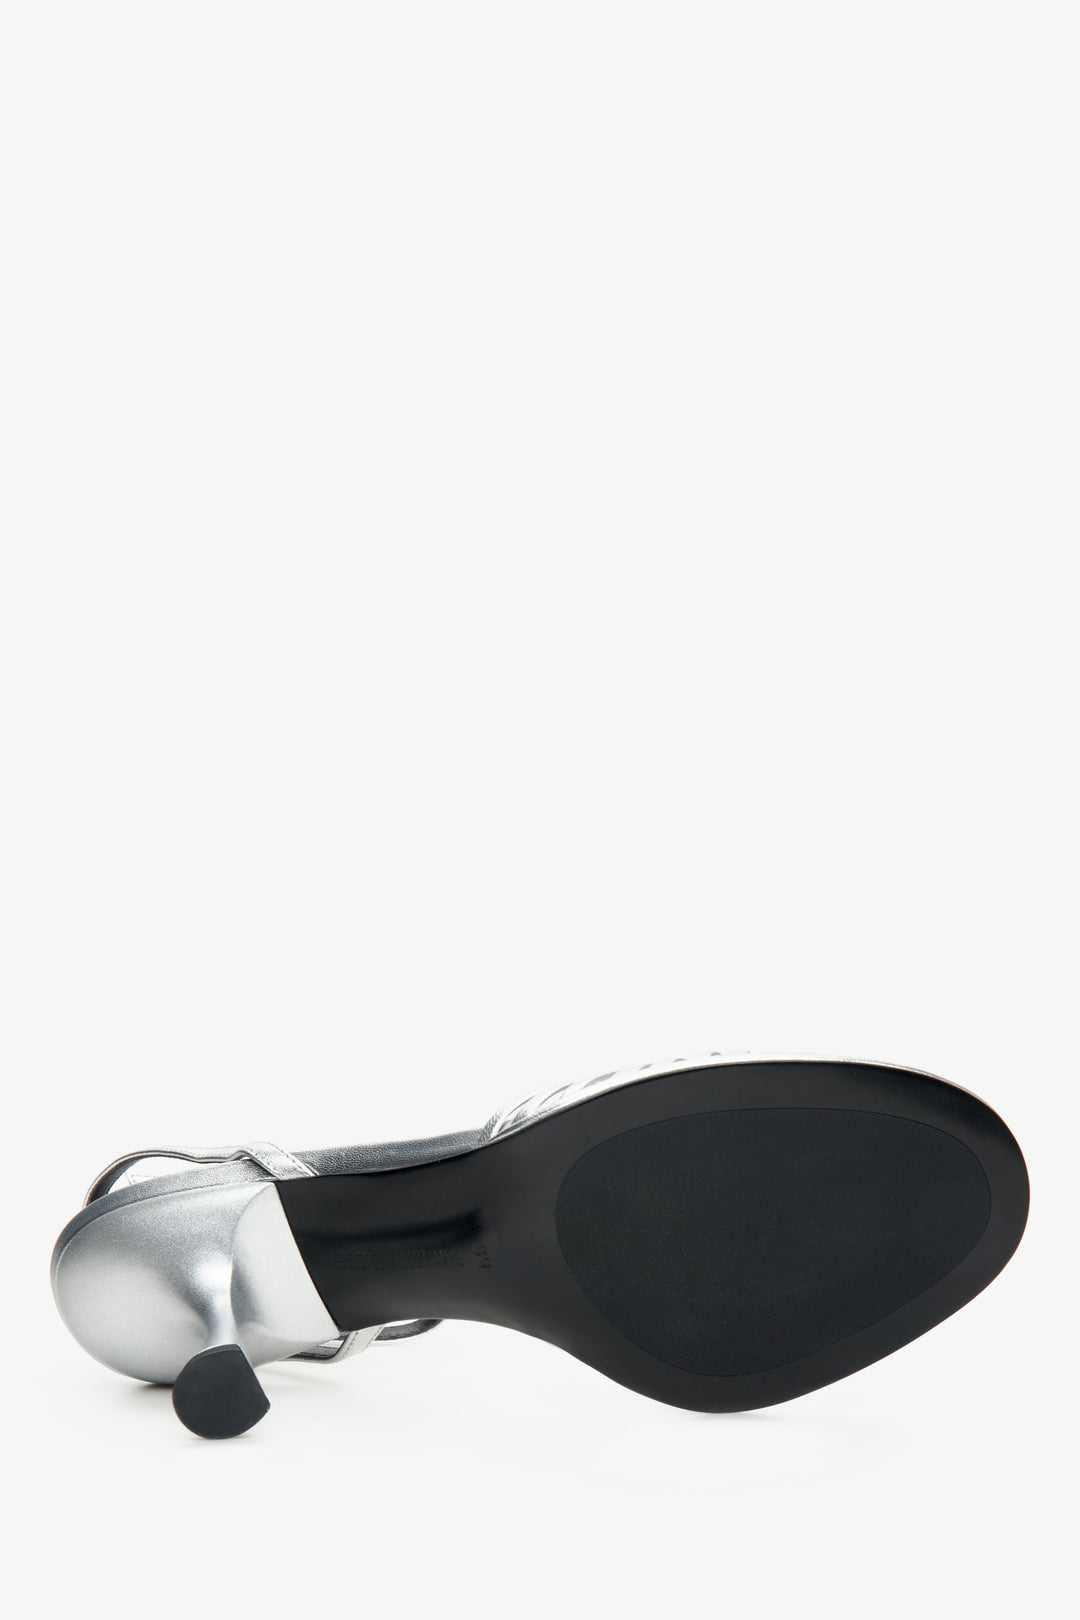 Estro x MustHave women's leather sandals with heels - close-up on the sole.